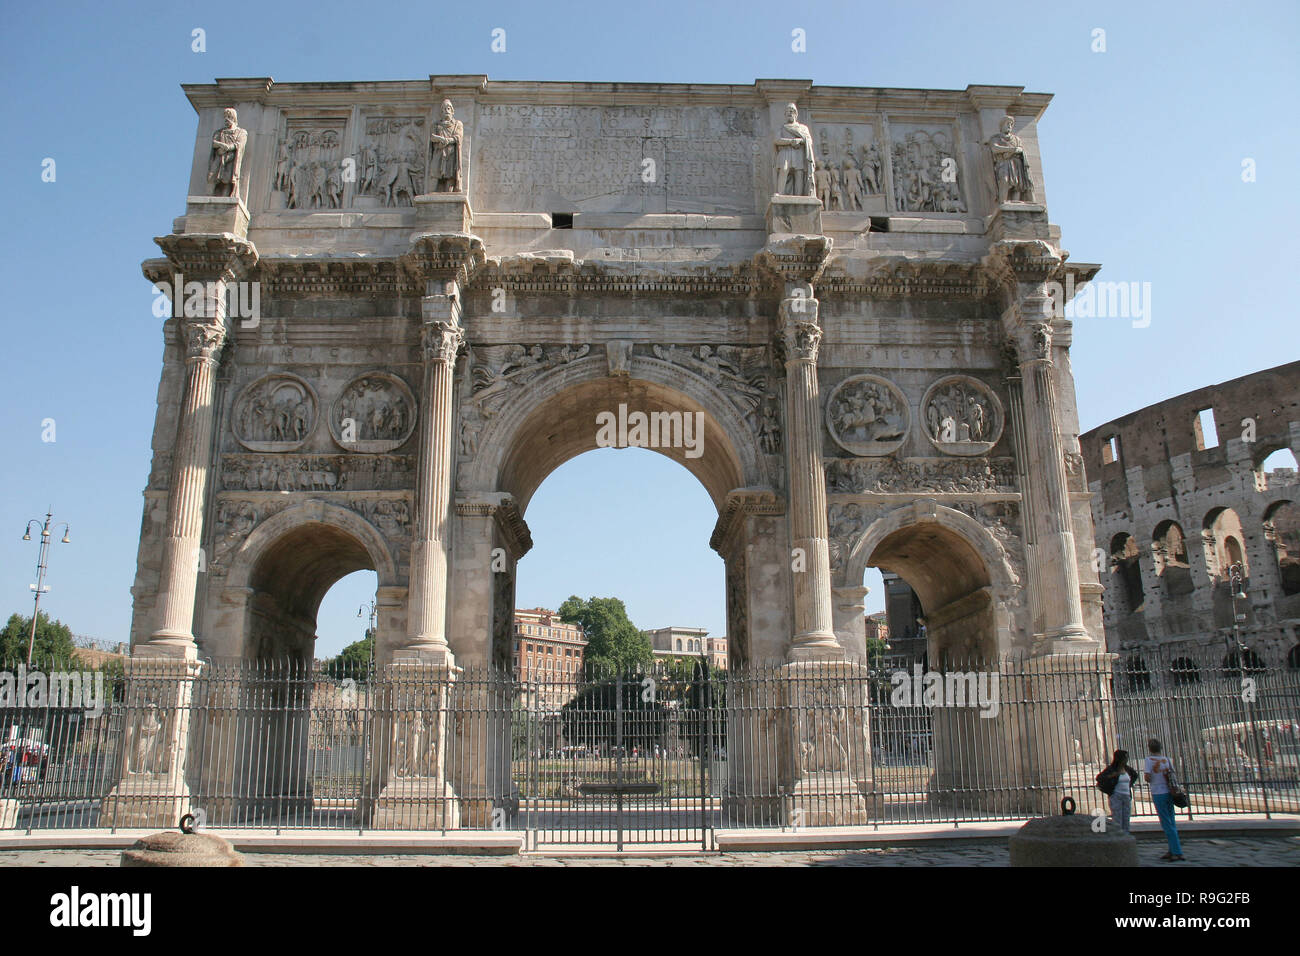 Roman Art. Arch of Constantine. Triumphal arch. It was erected to commemorate  Constantine victory over Maxentius at the Batlle of Milvian Bridge (October 28, 312). Reuse of parts of earlier buildings. View  the arch seen form Via Triumphalis. IV century AD. Rome. Italy. Europe. Stock Photo